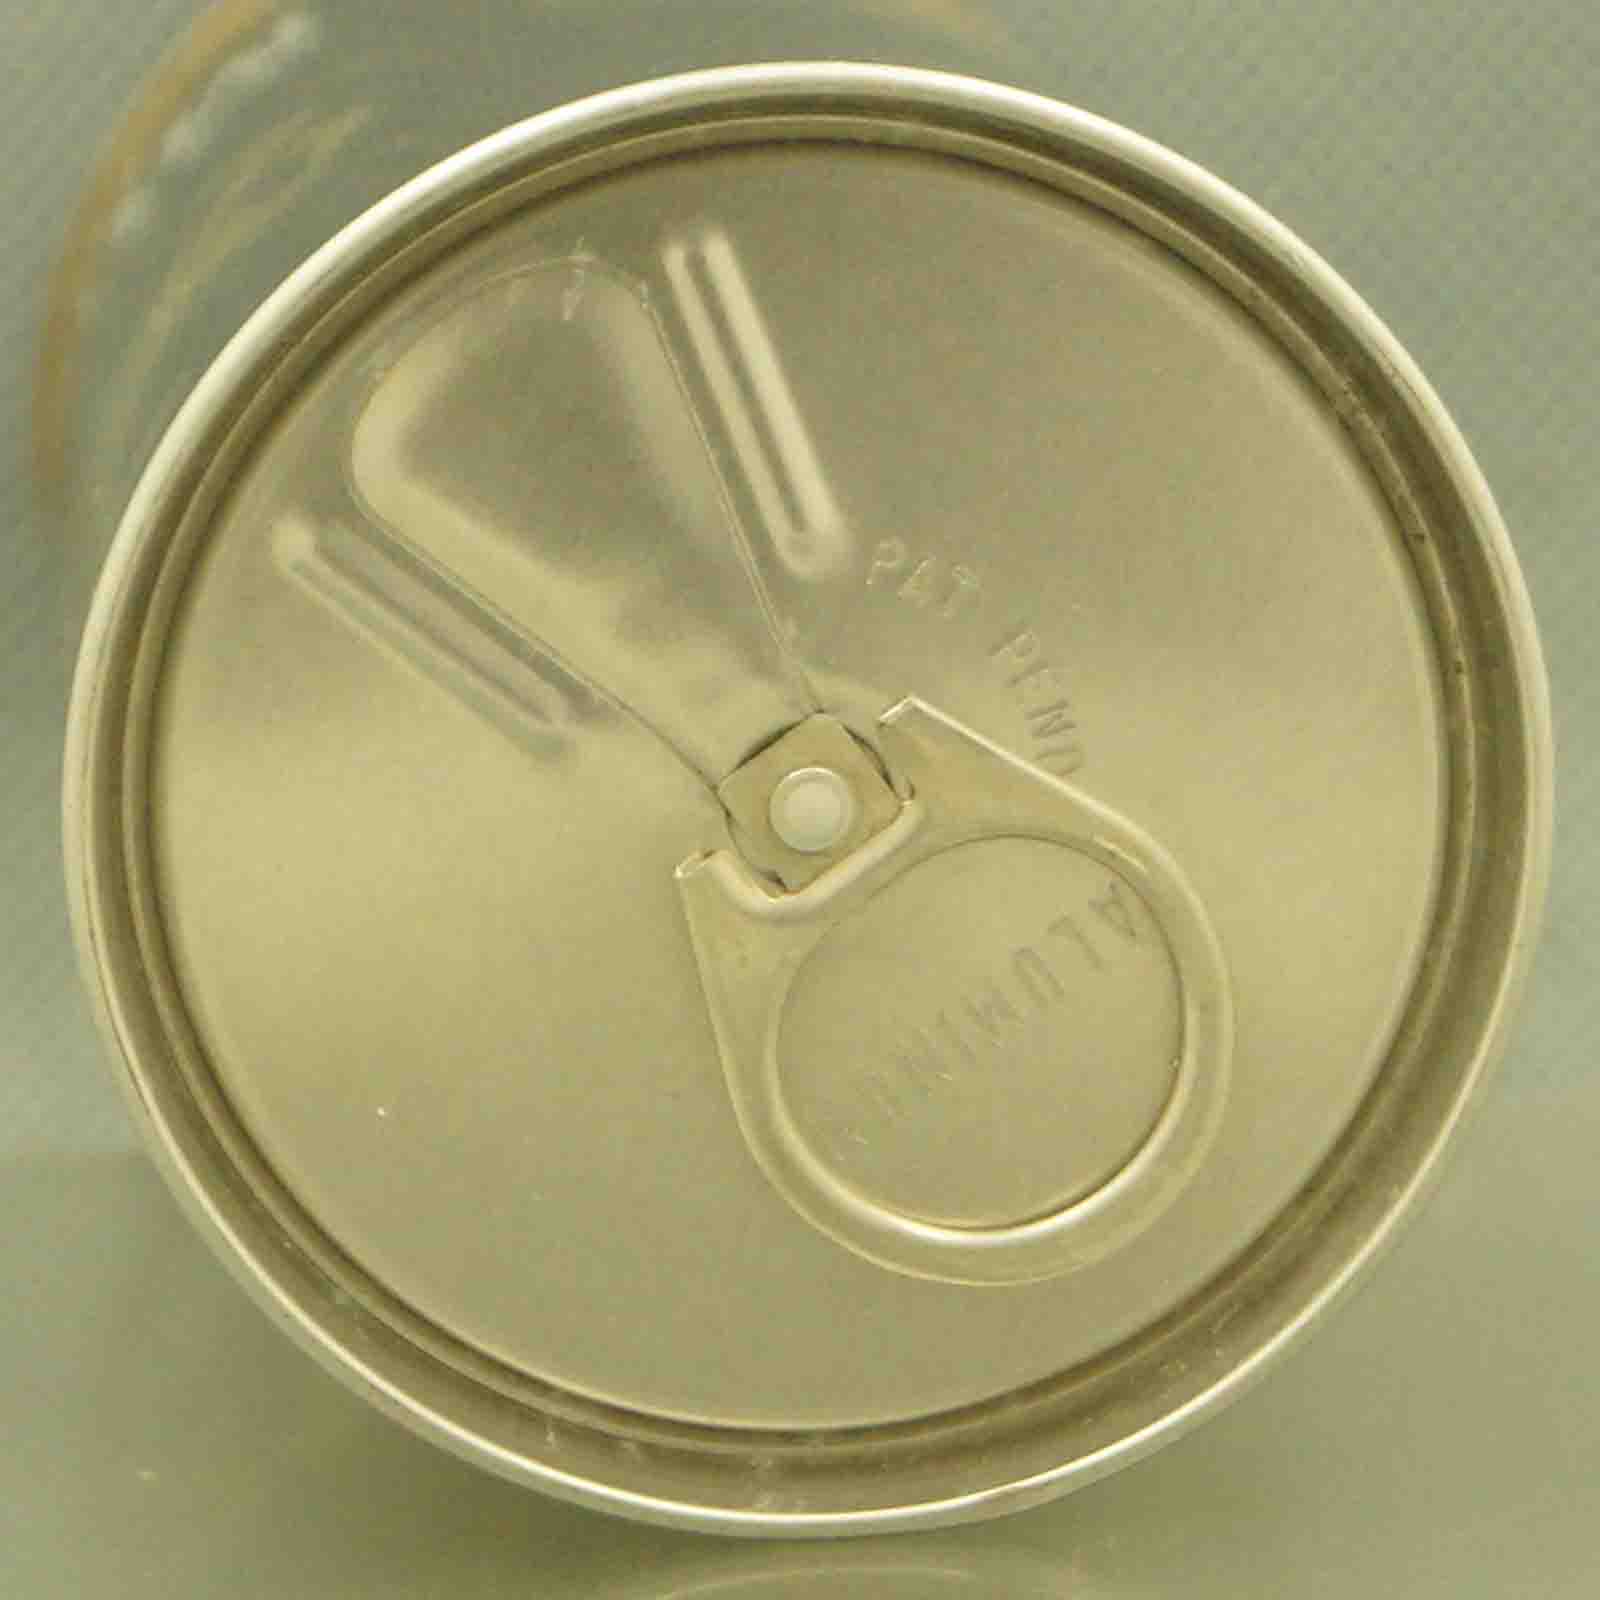 mustang 157-7 pull tab beer can 5